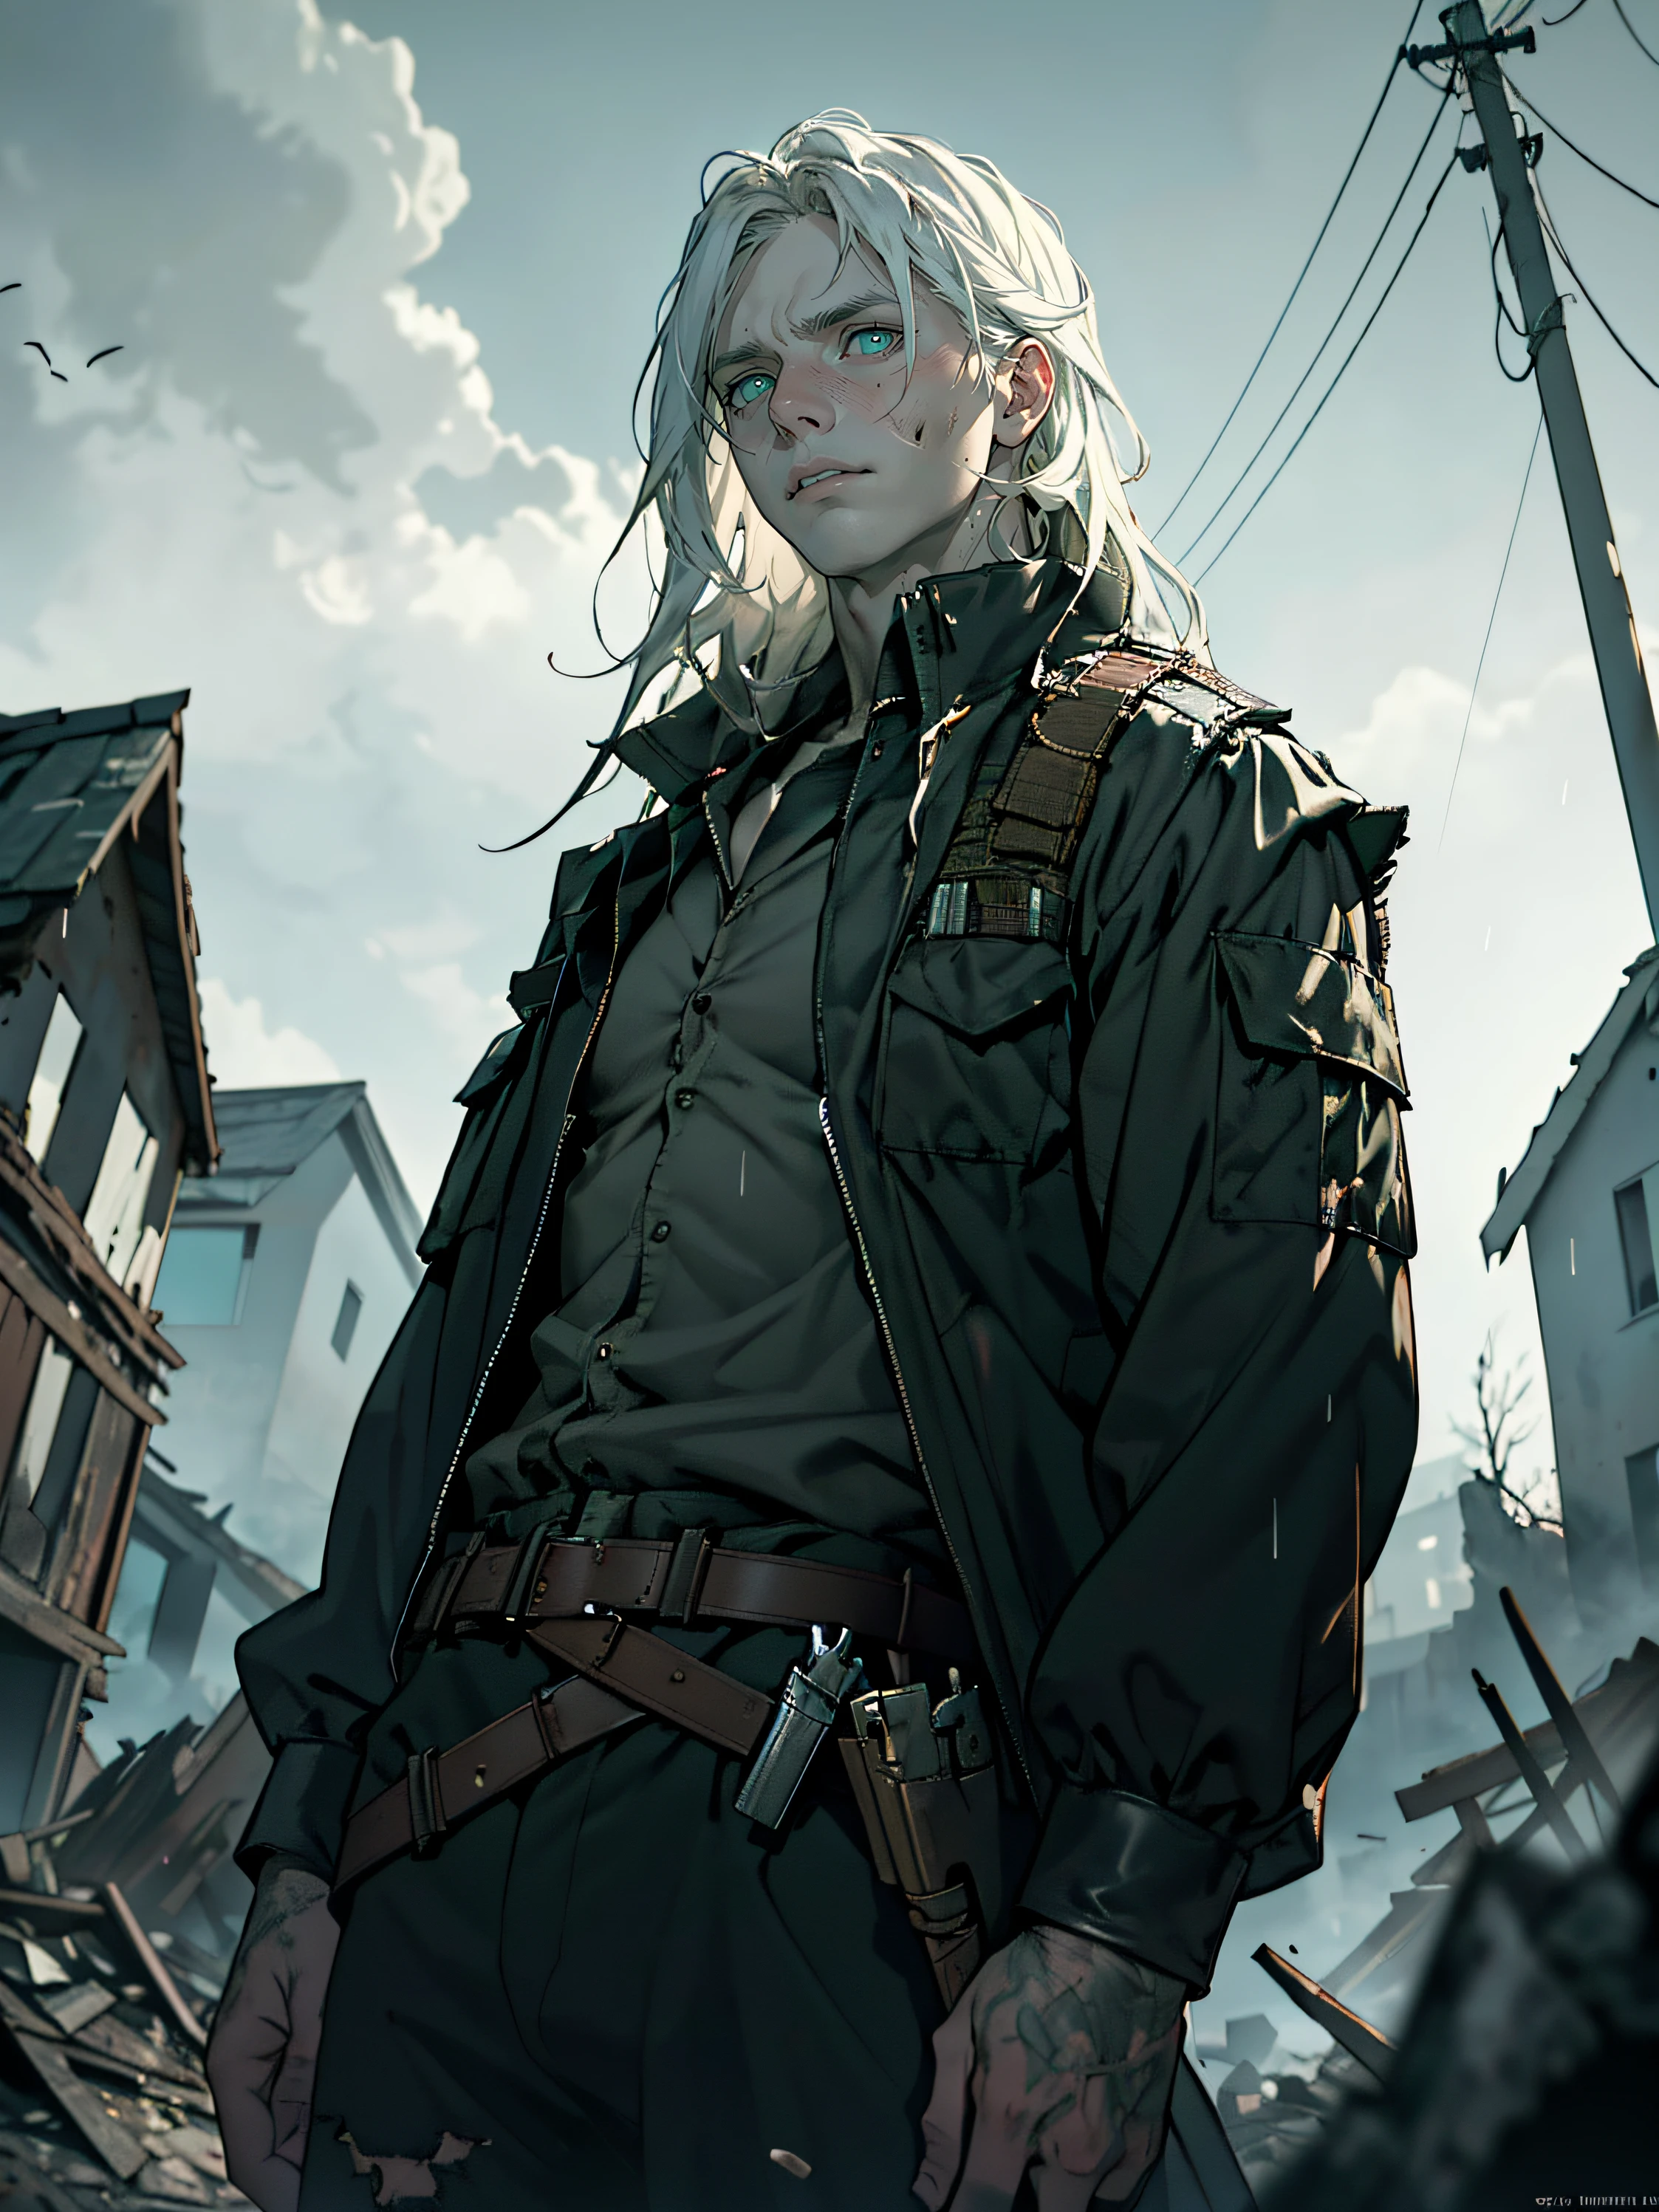 (Masterpiece), best quality, highest quality, highly detailed, original, high resolution CG Unit 8k wallpaper, (depth of field: 1.5), fidelity: 1.3, (best quality, artwork, masterpiece, 4k) A man with pale white skin, he is handsome and has an angelic beauty. His eyes are emerald green. The man's long hair is almost white blond. His face is a little dirty. The man wears a tattered black long-sleeved shirt with a long collar and a tactical vest. the man holds a combat knife. It seems a little tense, while in the background there are destroyed houses, a post-apocalyptic scenario. There is no sun, it is dark and there is rain.